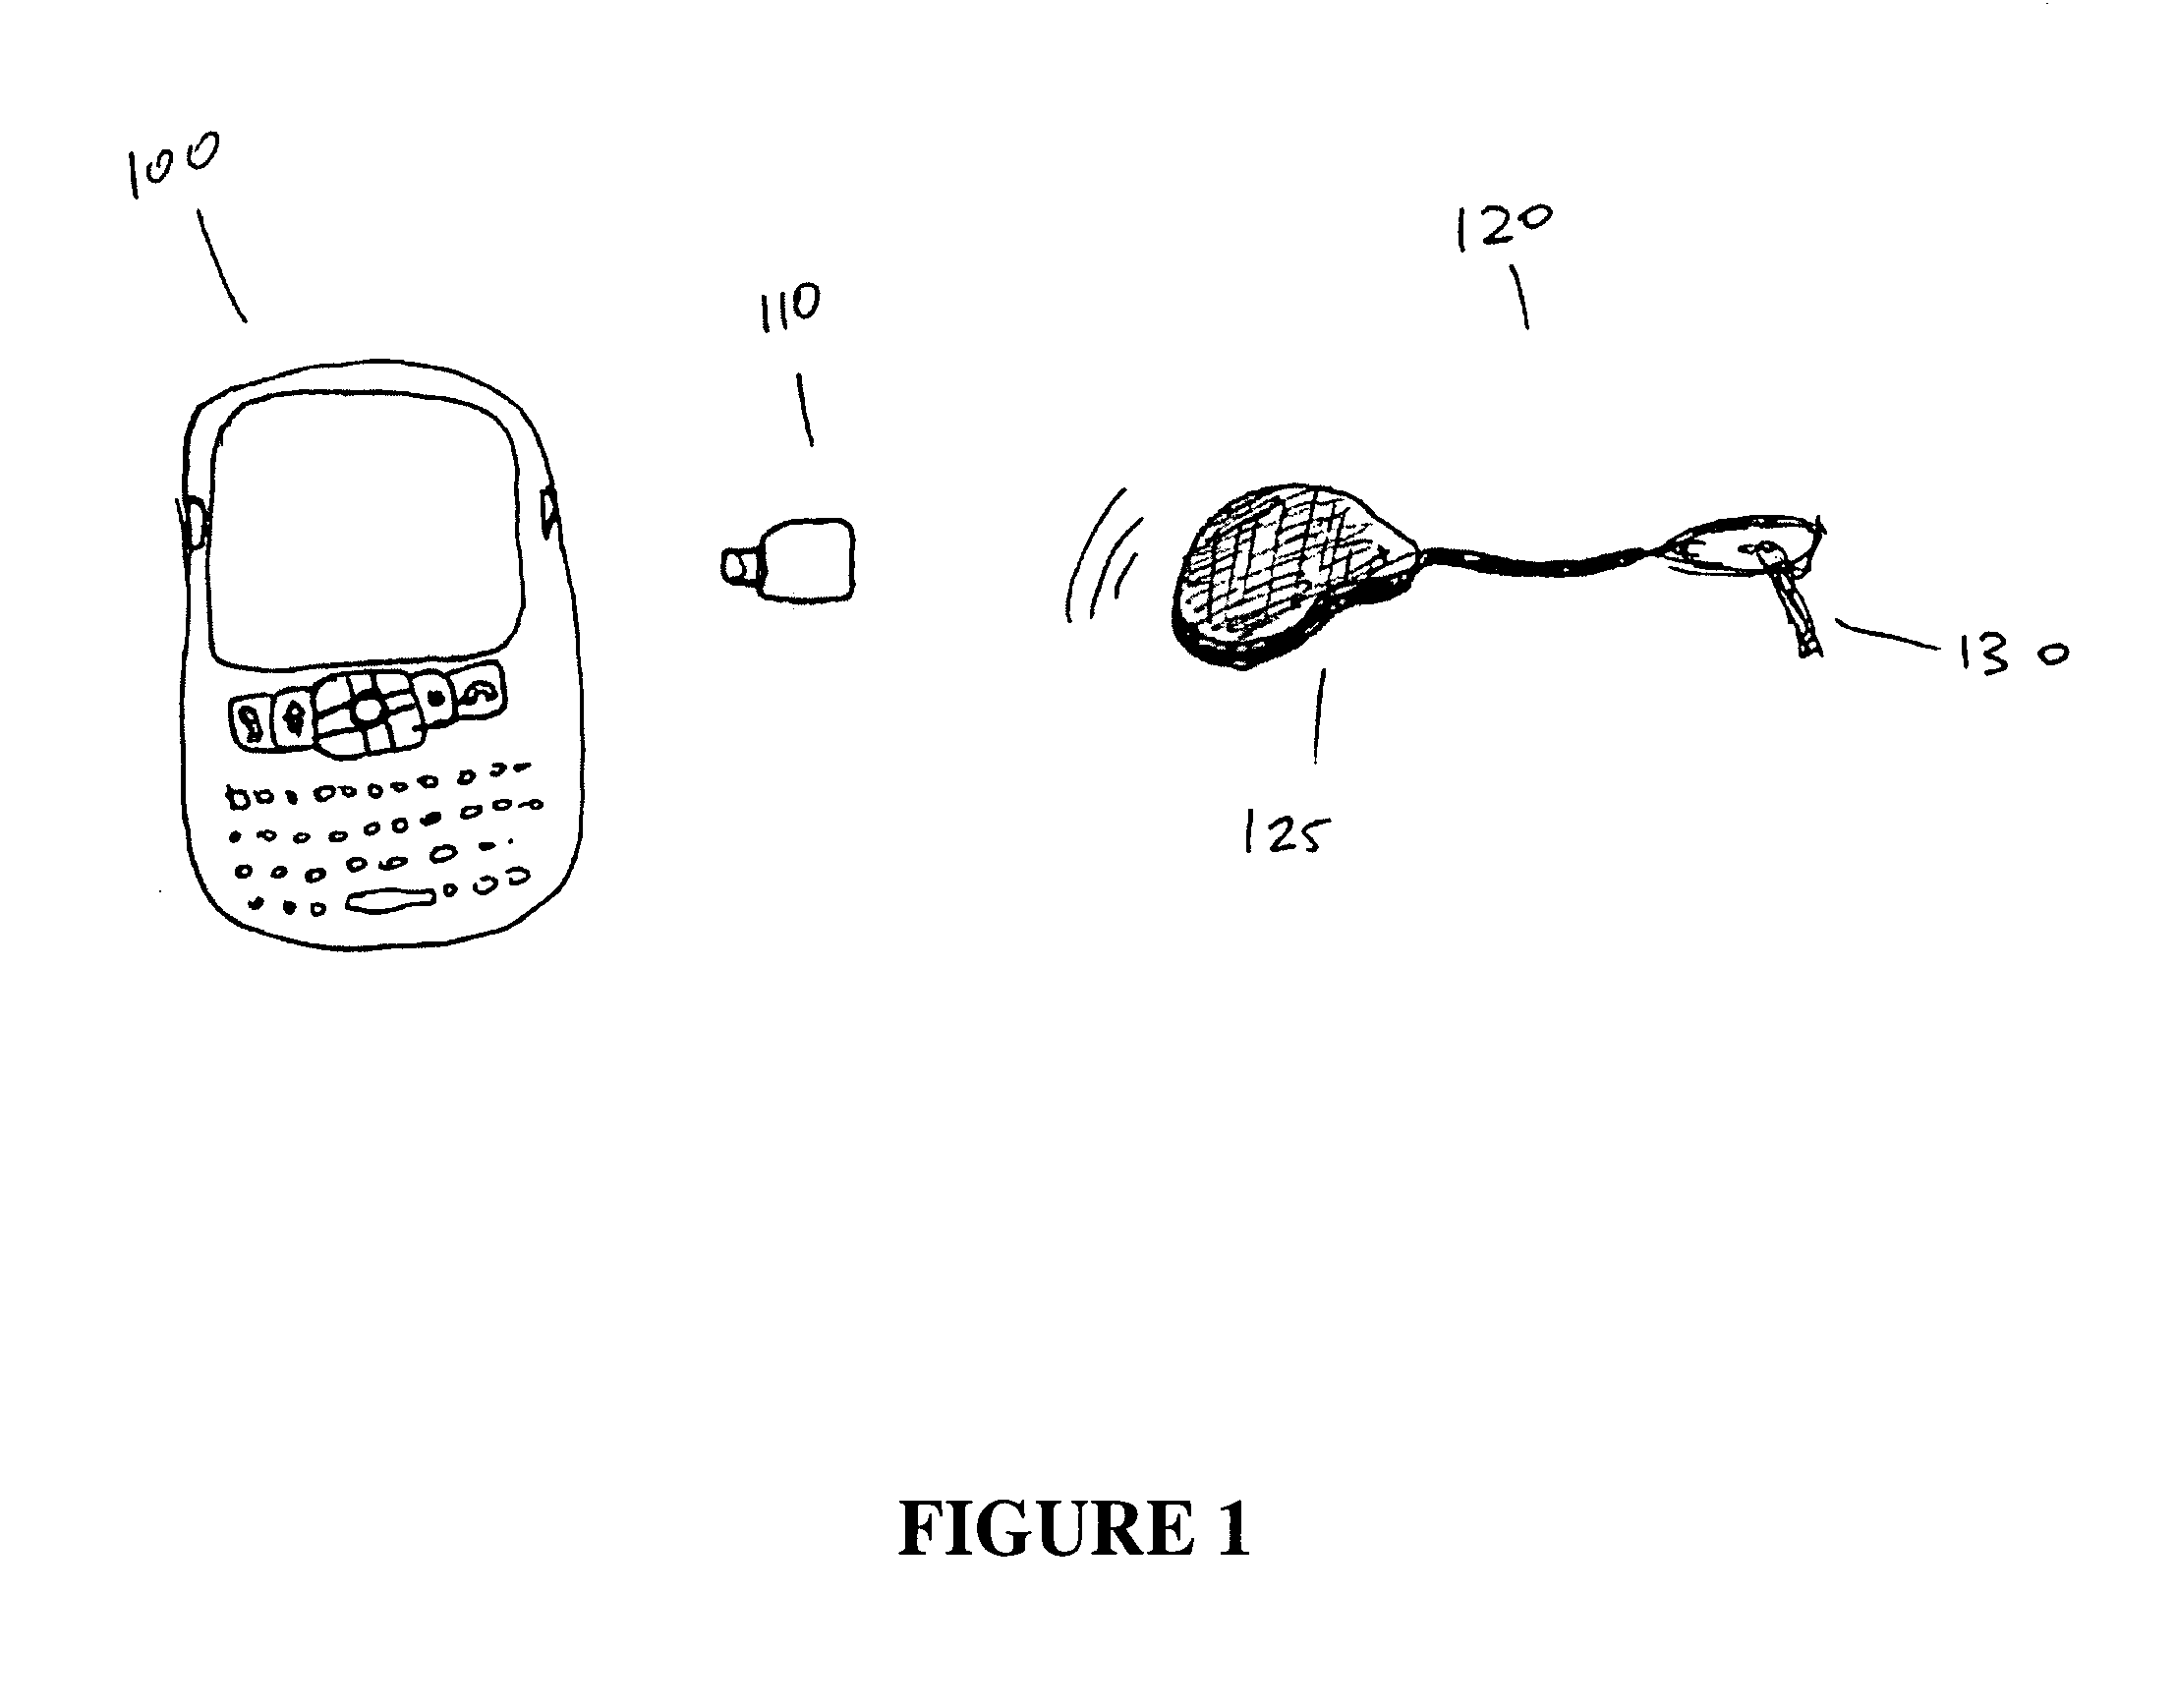 Systems and Methods for Diabetes Management Using Consumer Electronic Devices